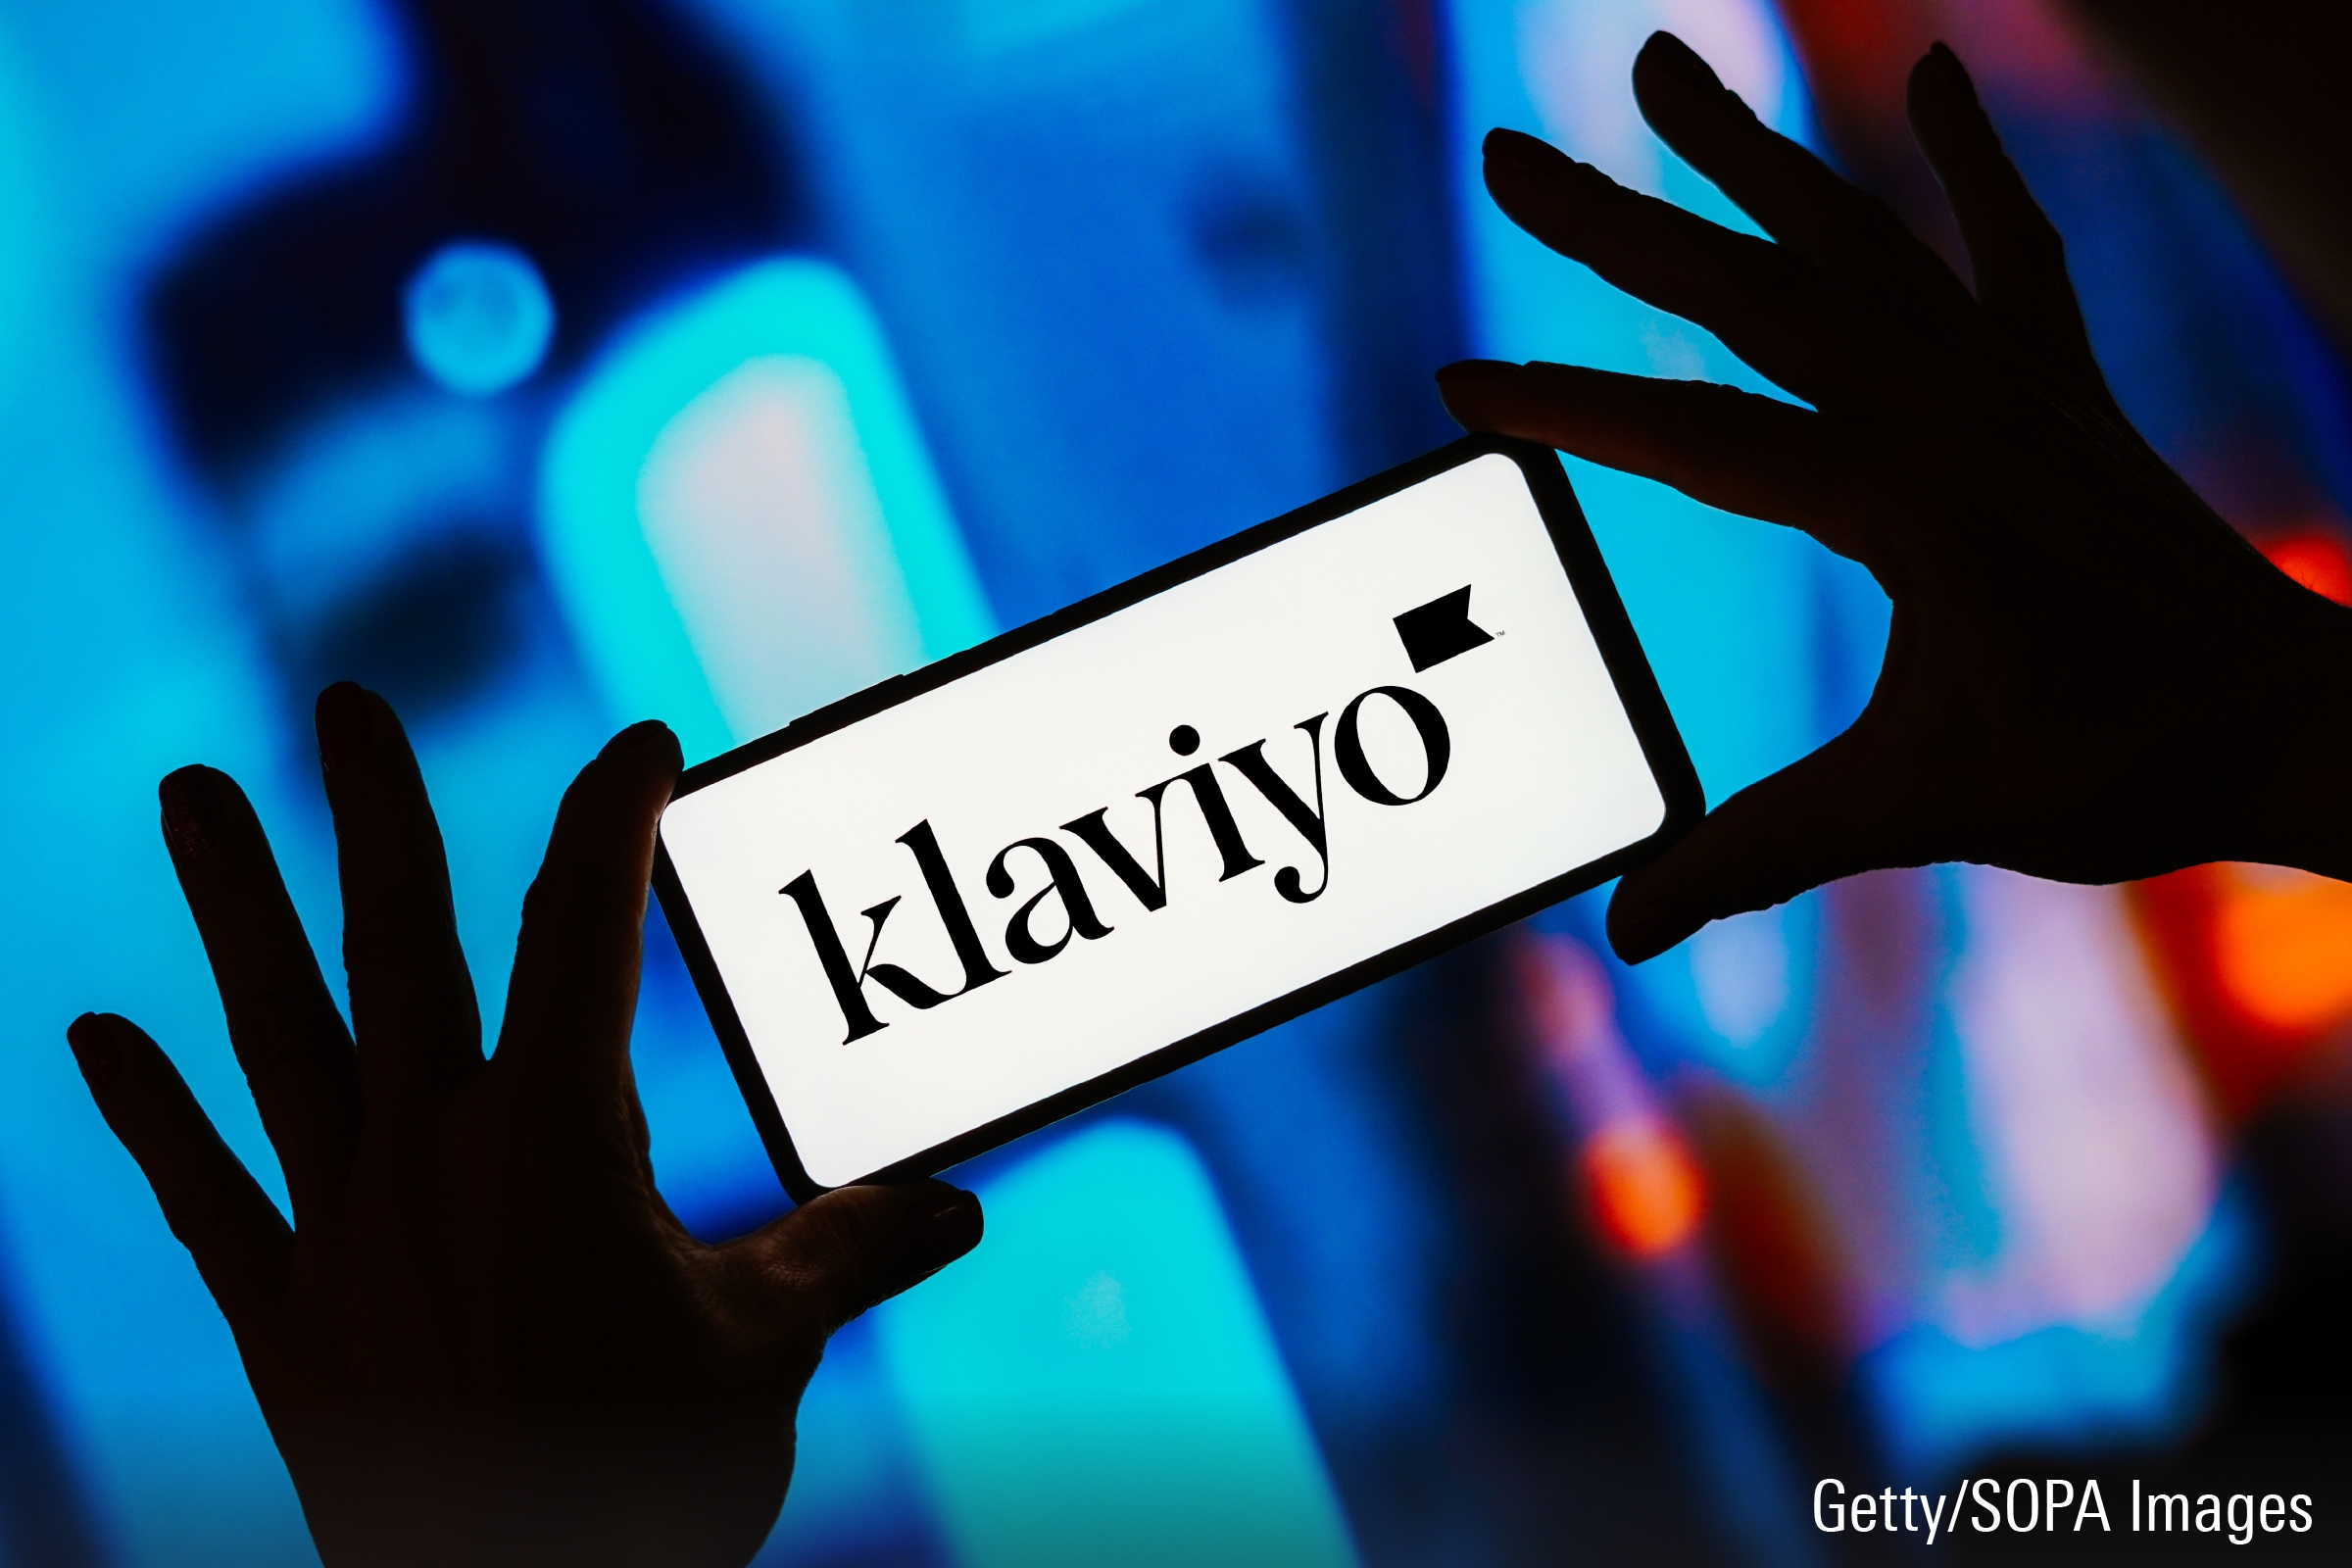 Klaviyo IPO: A ‘Best-In-Class’ Marketing Tech Company With Strong Revenue Growth